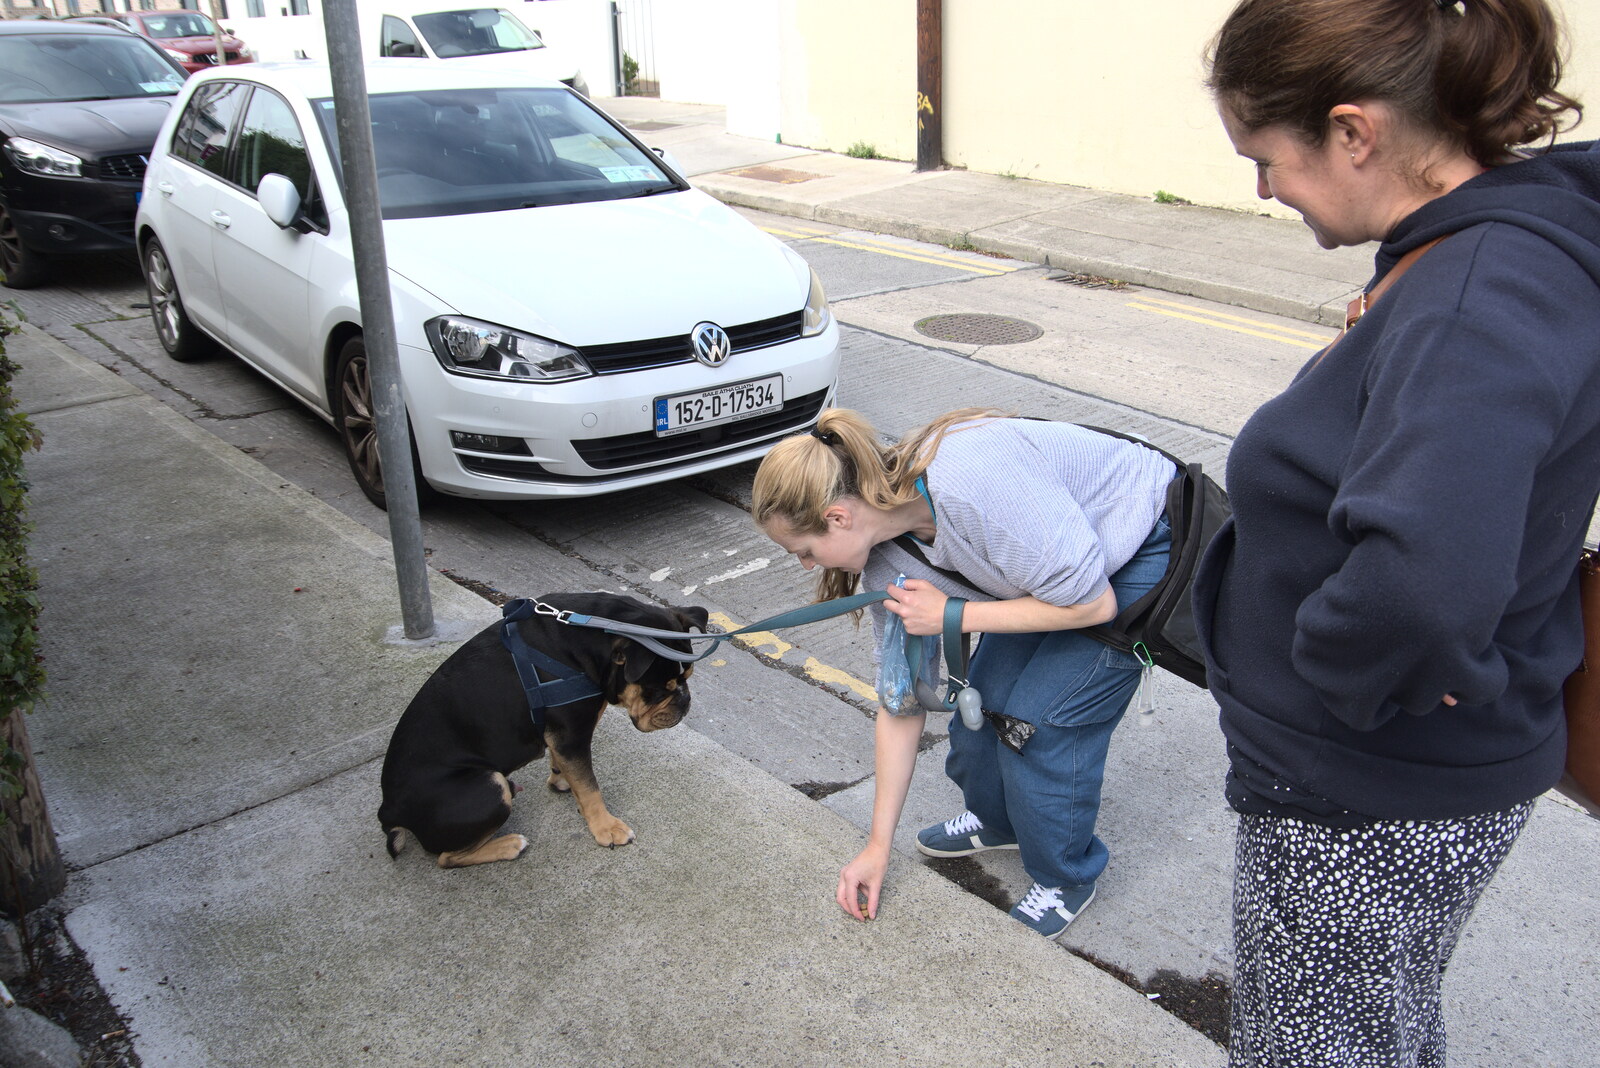 We meet up with Jen and her dog, Bear from Manorhamilton and the Street Art of Dún Laoghaire, Ireland - 15th August 2021